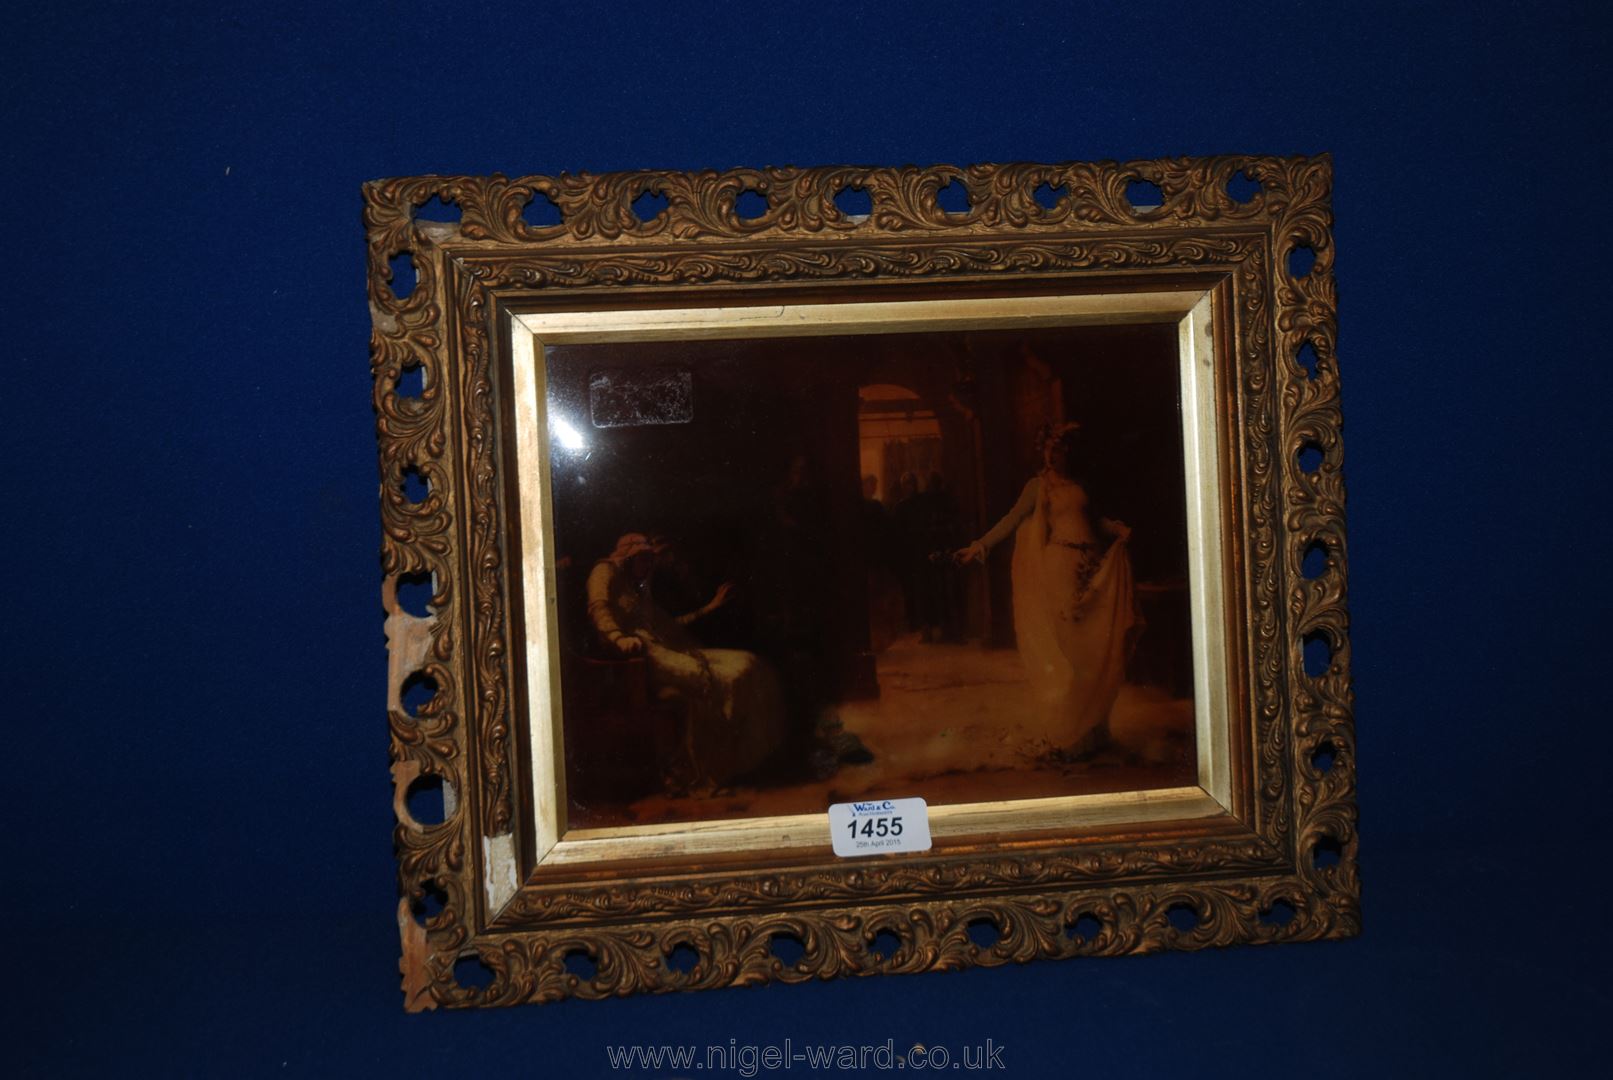 A Crystoleum in a gilt frame of a lady.